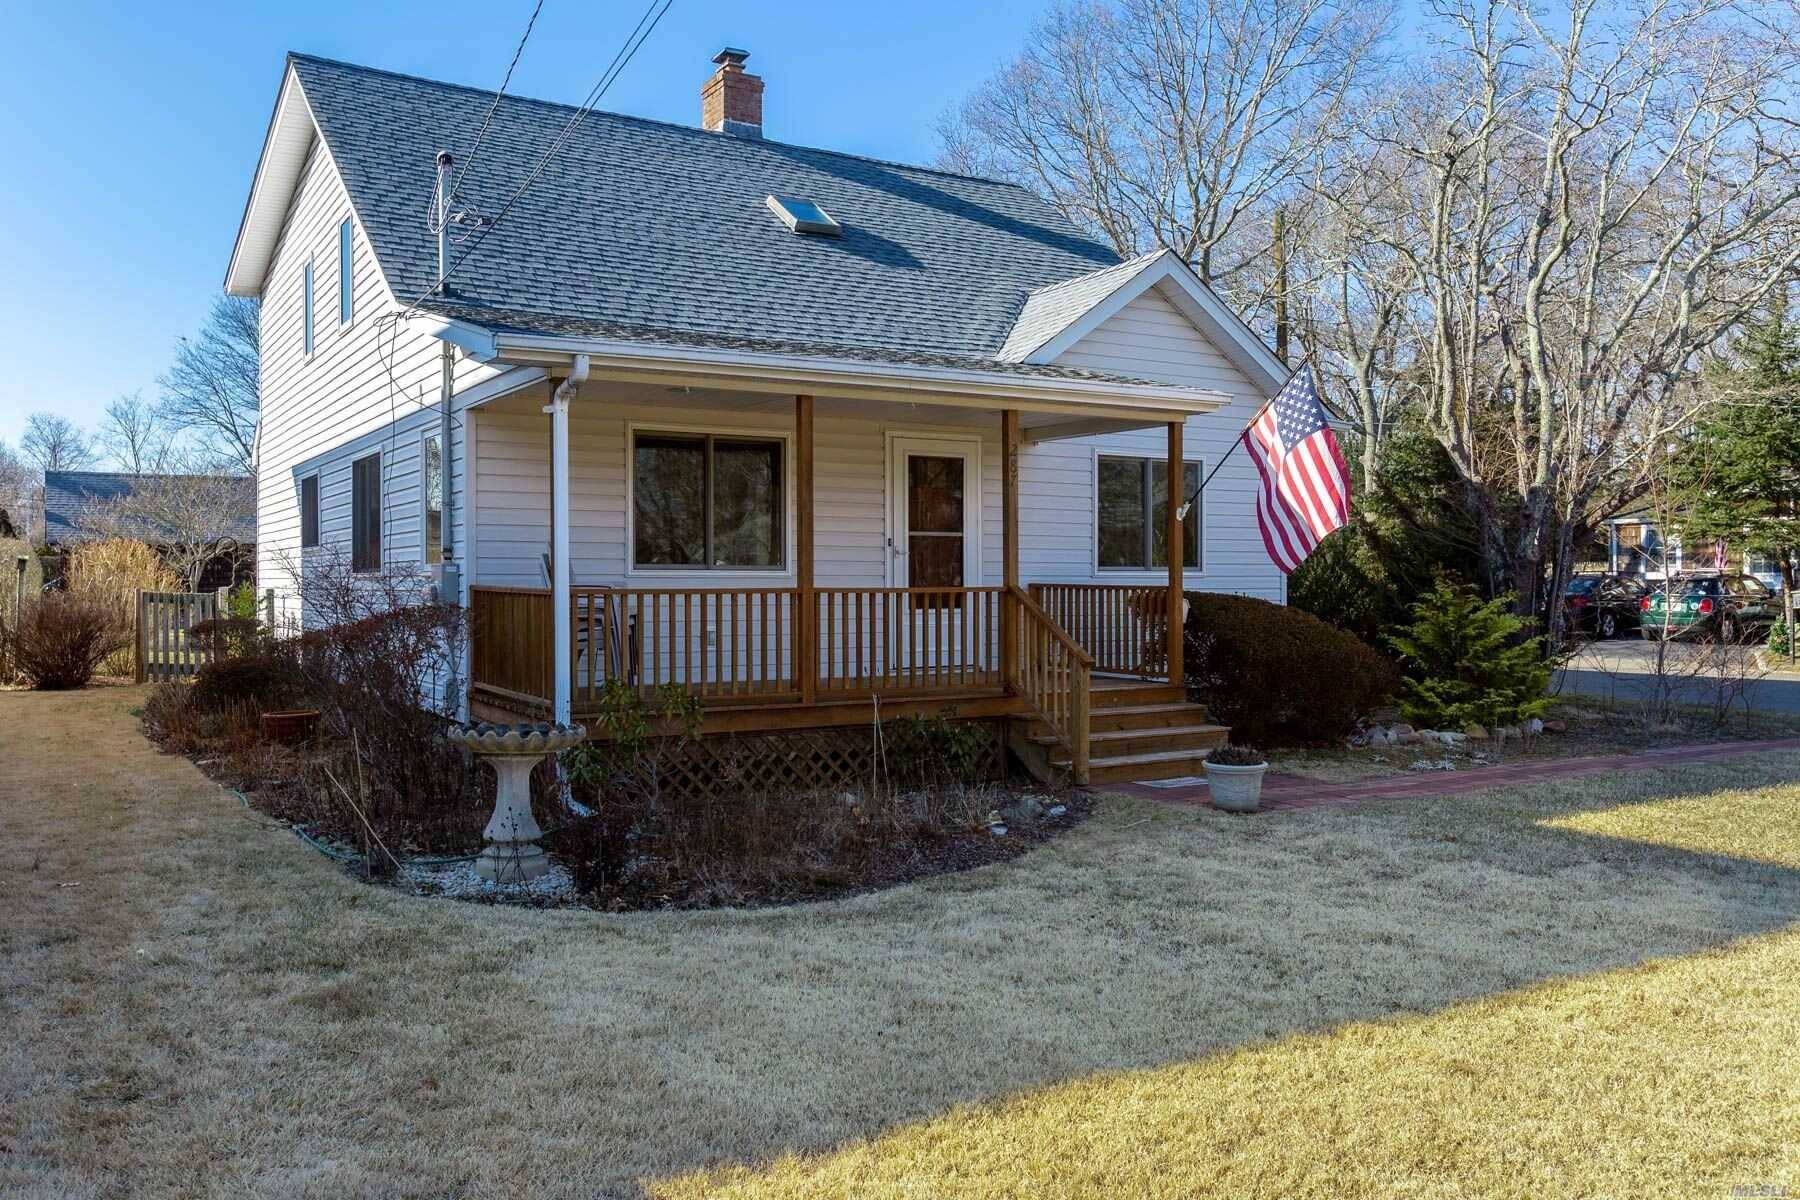 In The Village Of Westhampton Beach, South Of The Highway, 3 Bedroom, 2 Full Bathroom Cape Renovated In 1993 With Oversized Windows, New Appliances, Slider, Sky Light In An Open ...